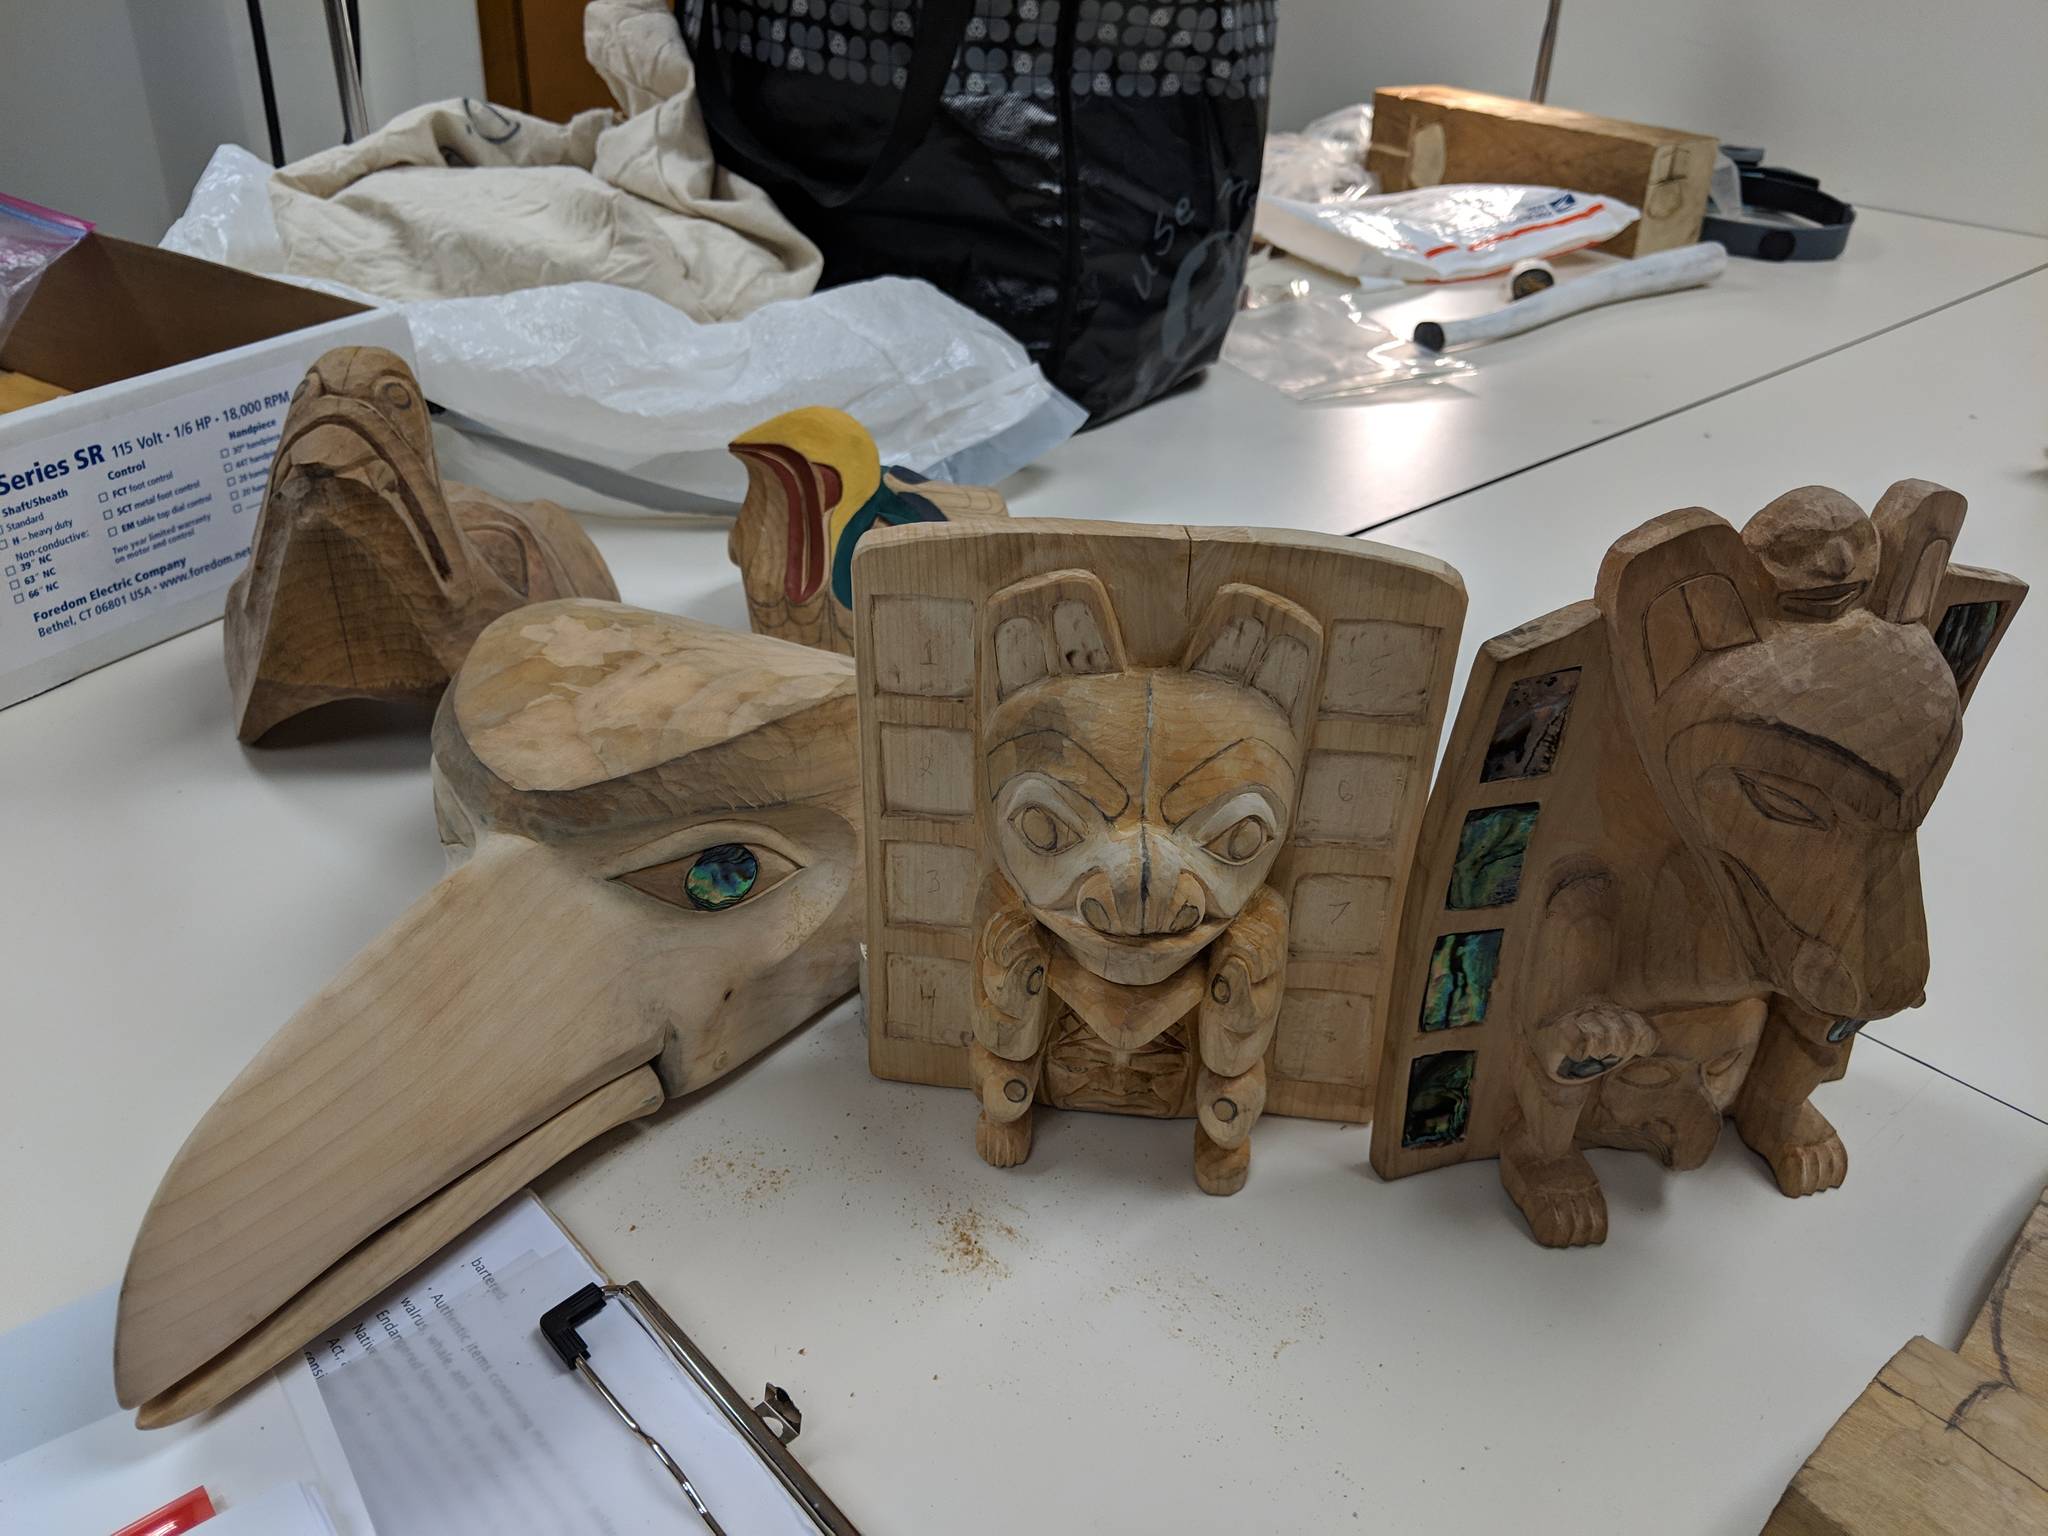 An assortment of carved works made during carving practice Saturday, Jan. 12, 2019. (Ben Hohenstatt | Capital City Weekly)